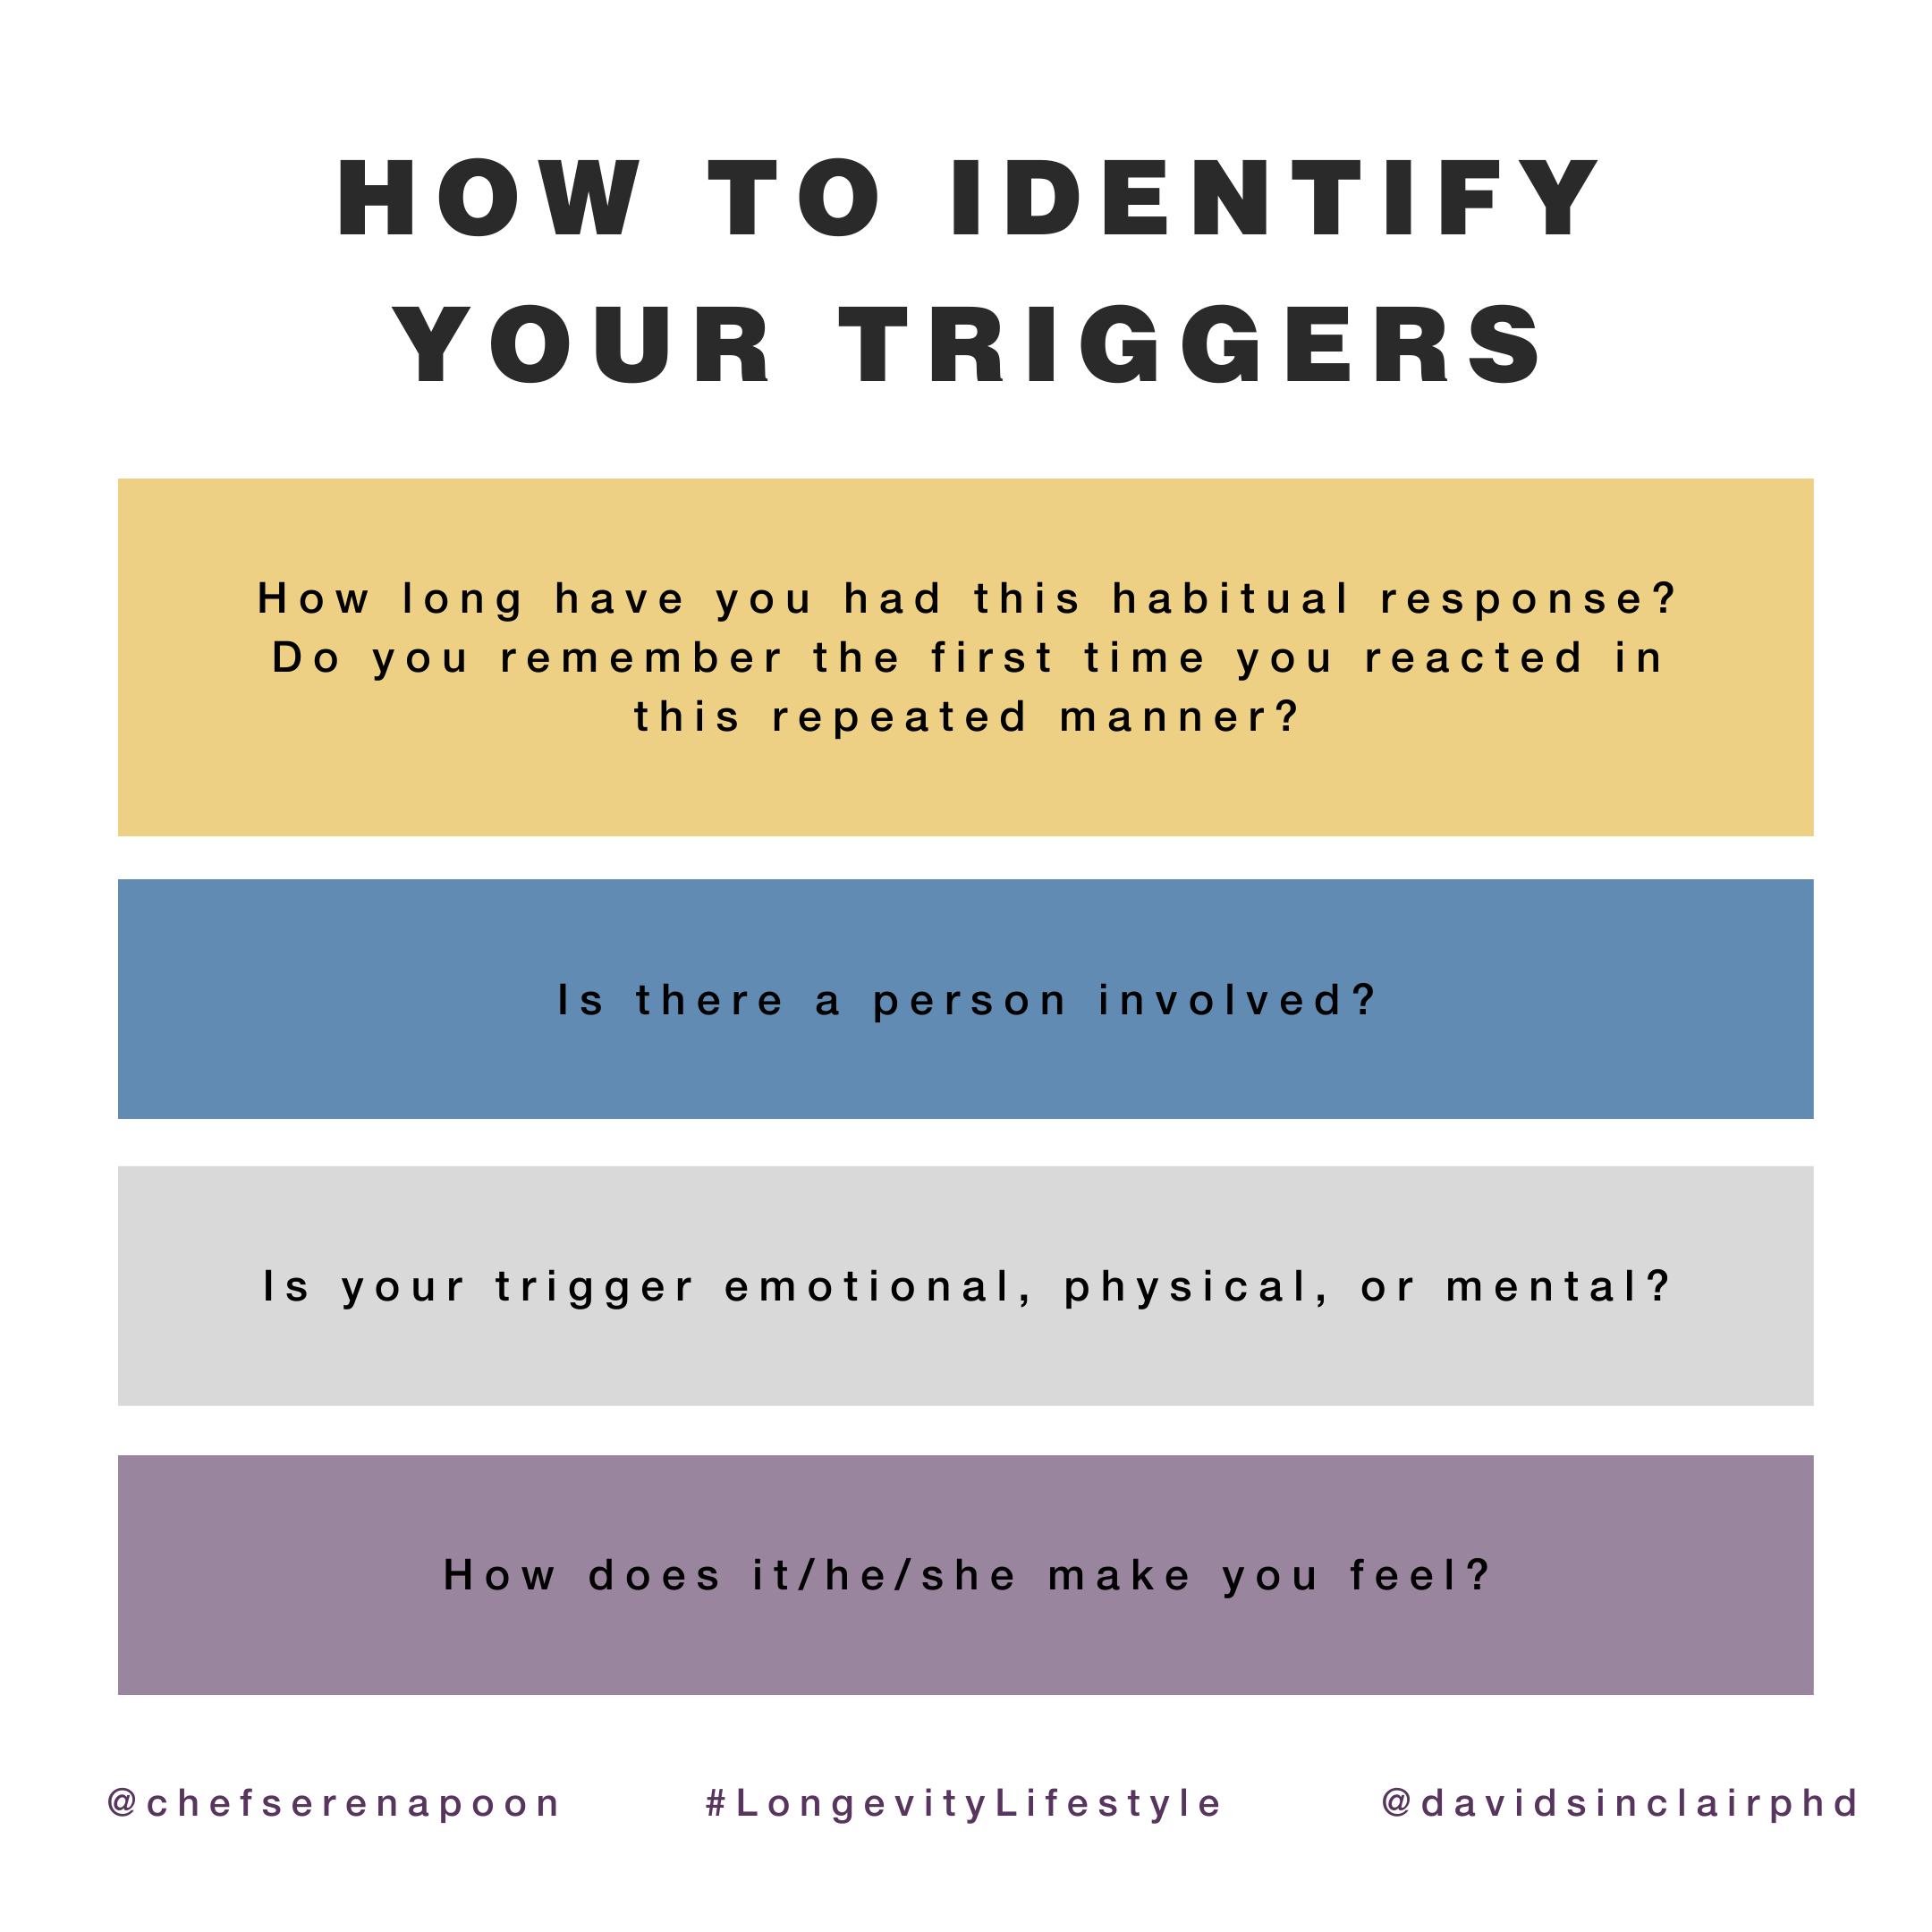 How to identify your triggers